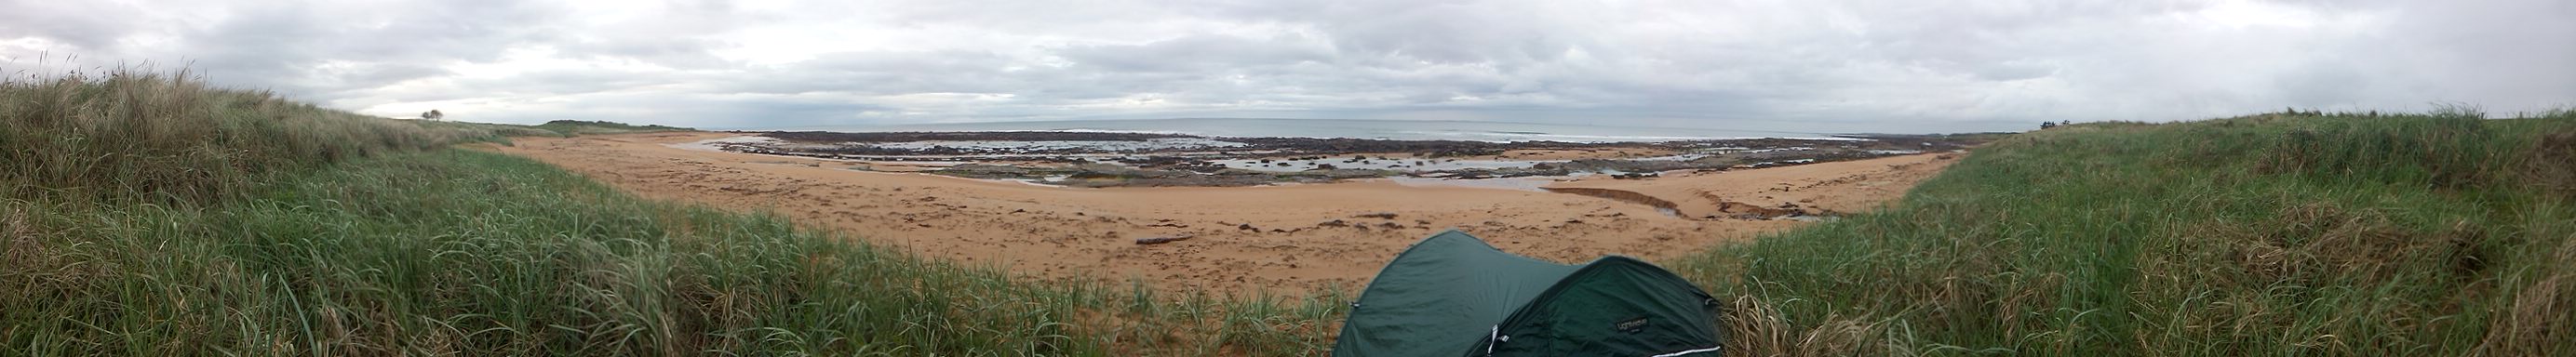 Panorama of a tent between two grassy dunes with a sandy beach and distant sea